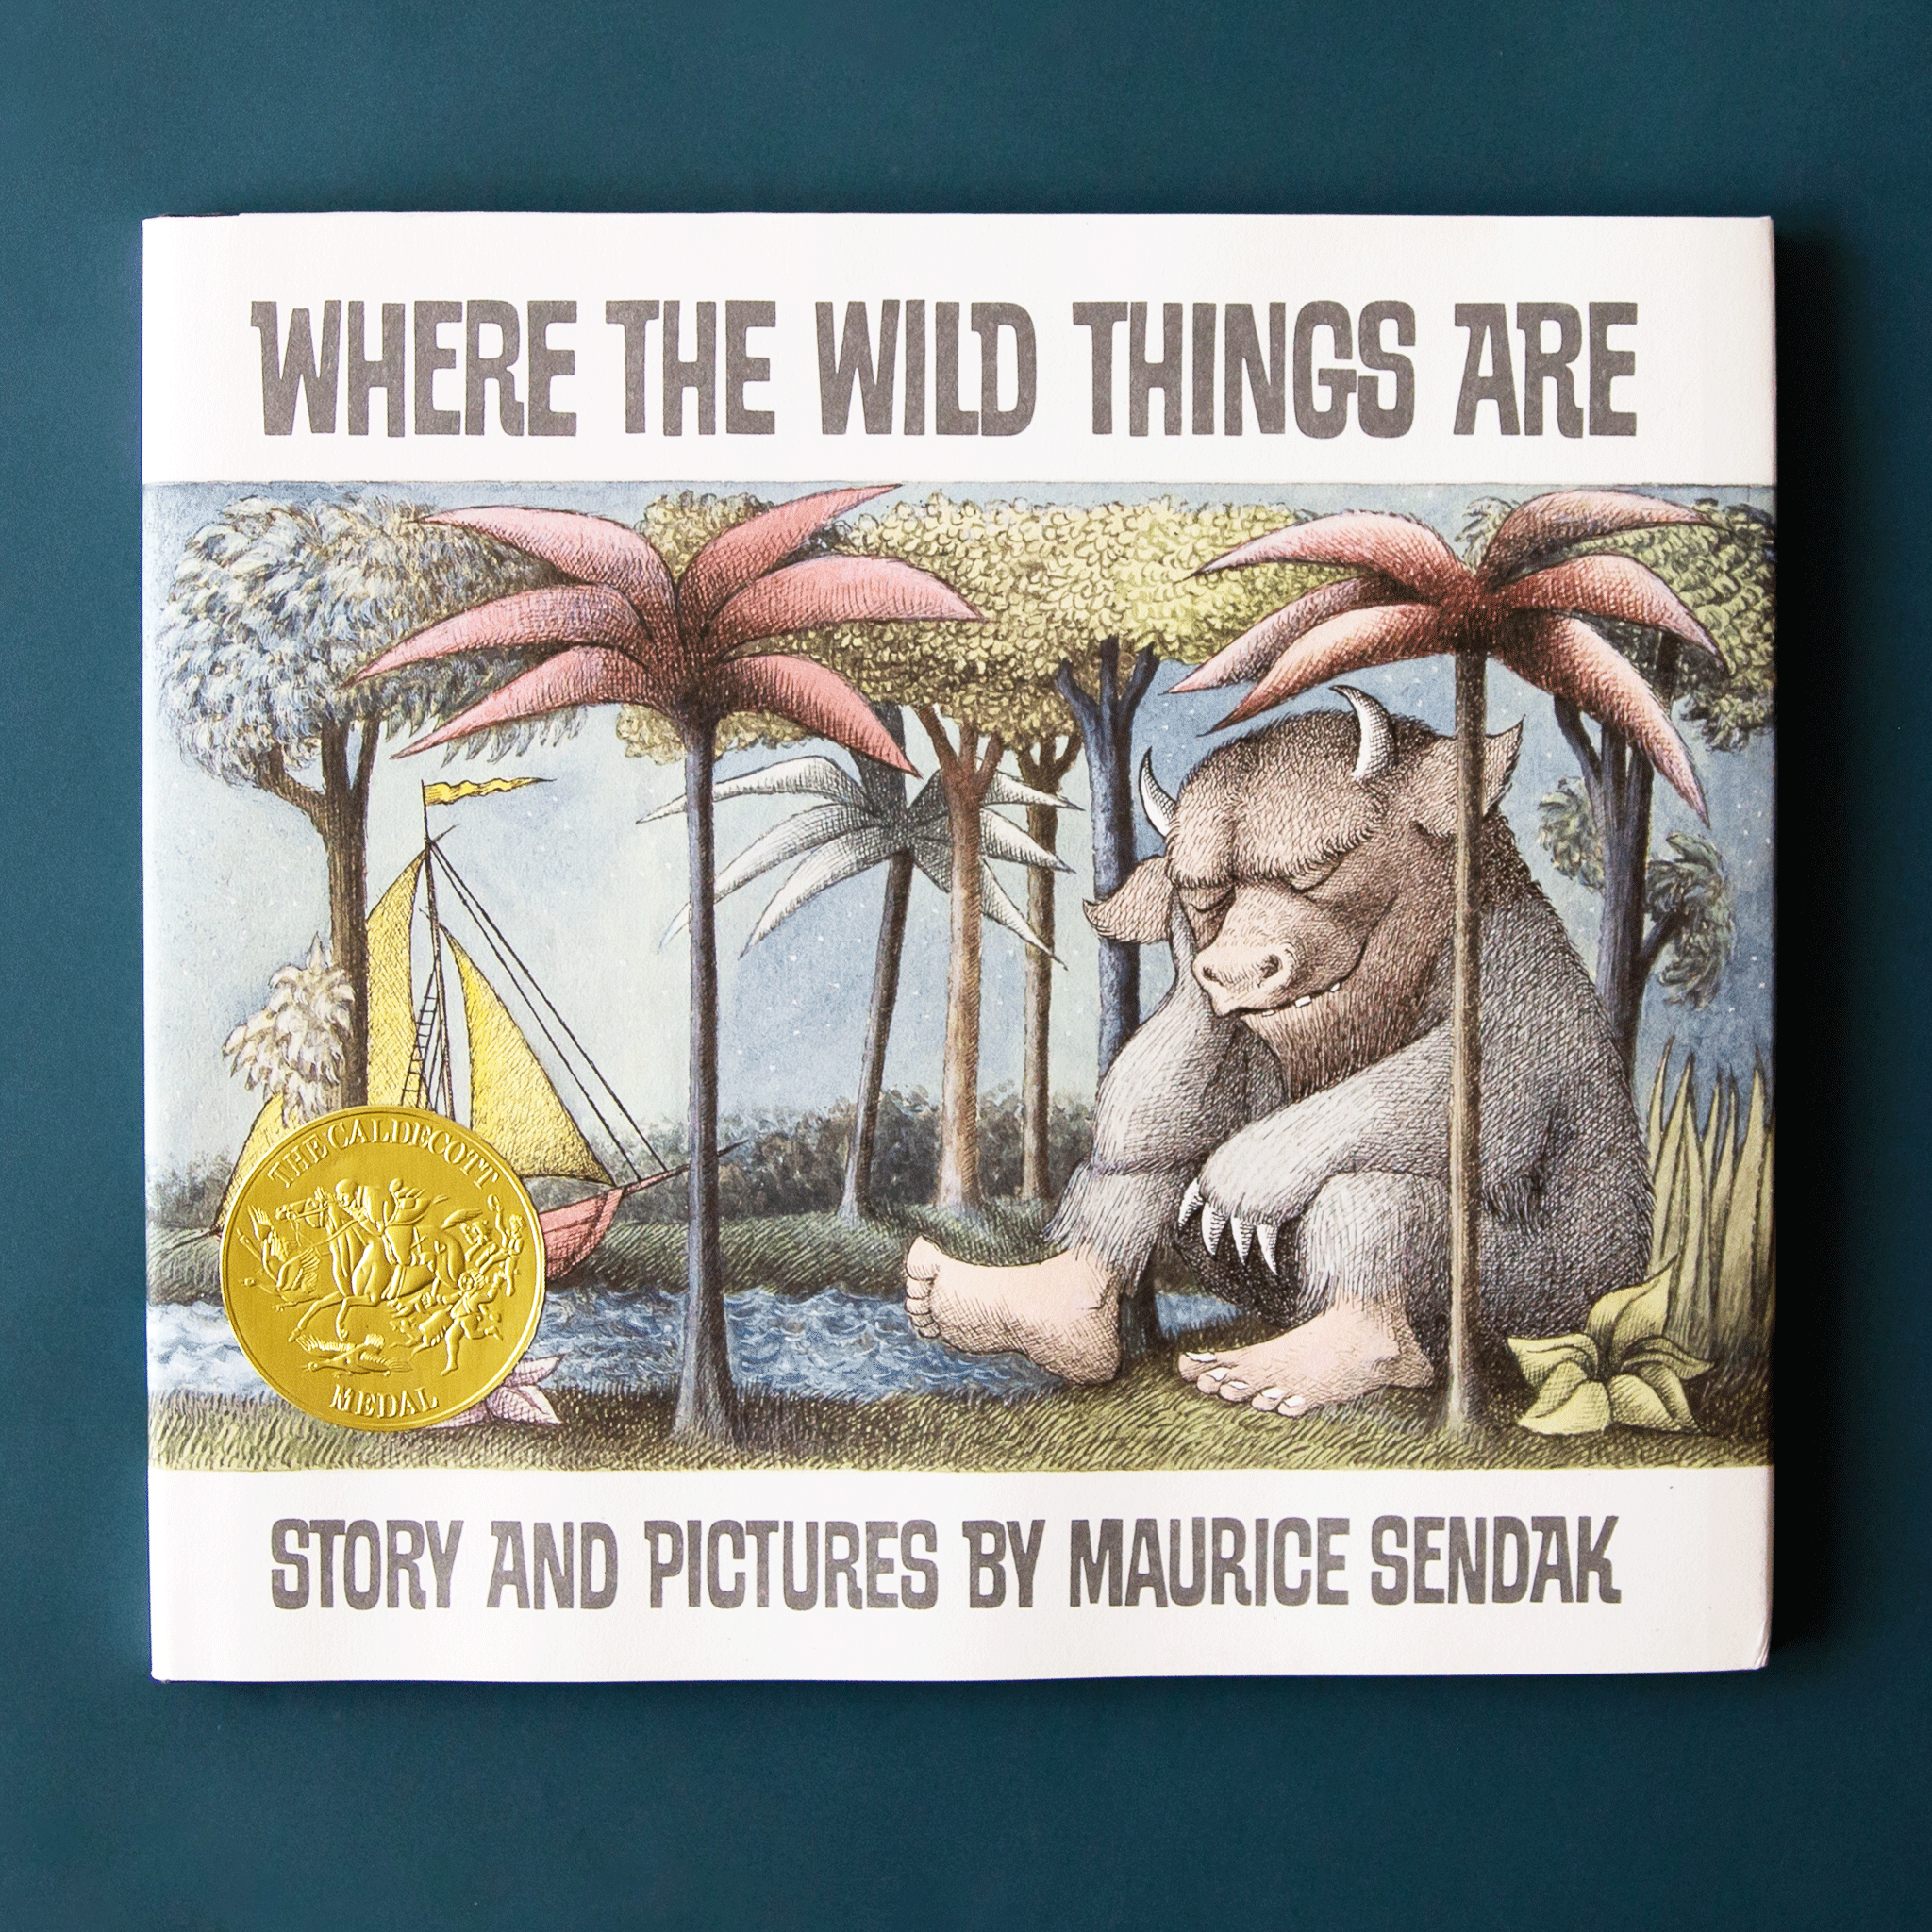 This classic children's story book features a dreamy forest homing a large mystic creature with pale blue fur, sharpened claws and round horns. The creature sits peacefully among the trees and across from a pond filled with a soft yellow and red sail boat. The book is titled 'Where the Wild Things Are' in pale teal capital lettering above.